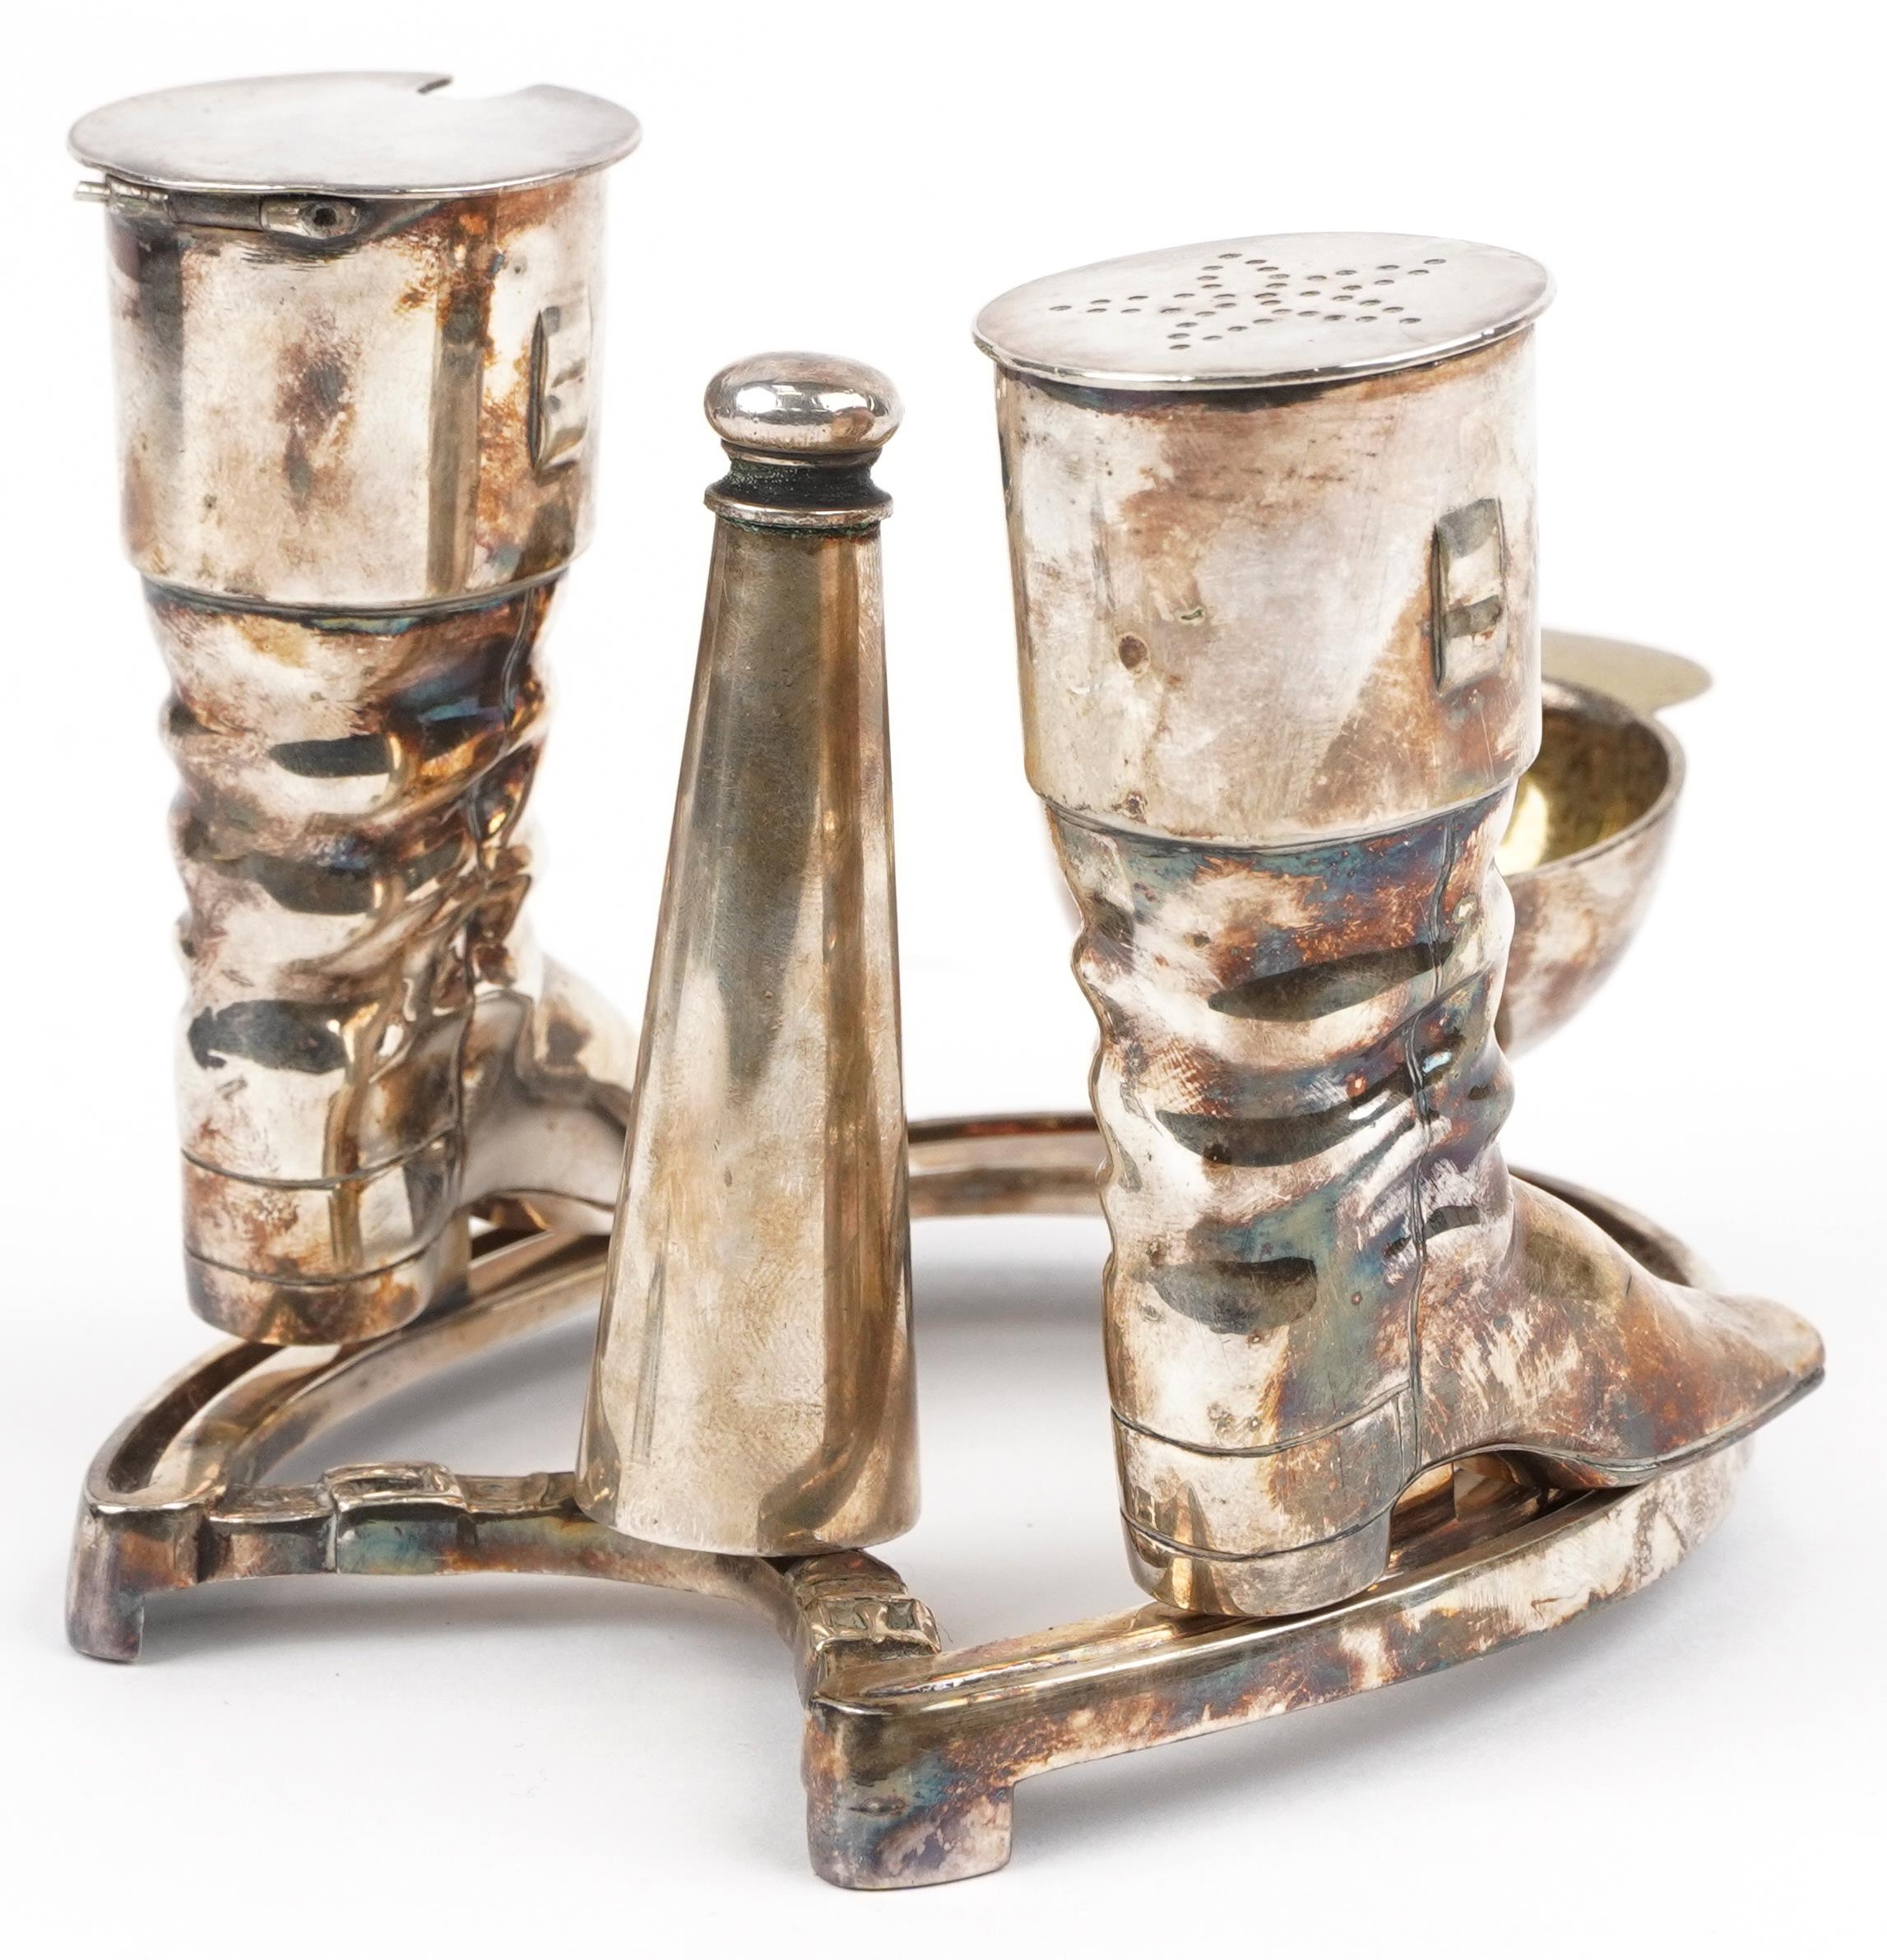 Elkington & Co, equestrian interest silver plated cruet set in the form of a horseshoe, riding boots - Image 4 of 7